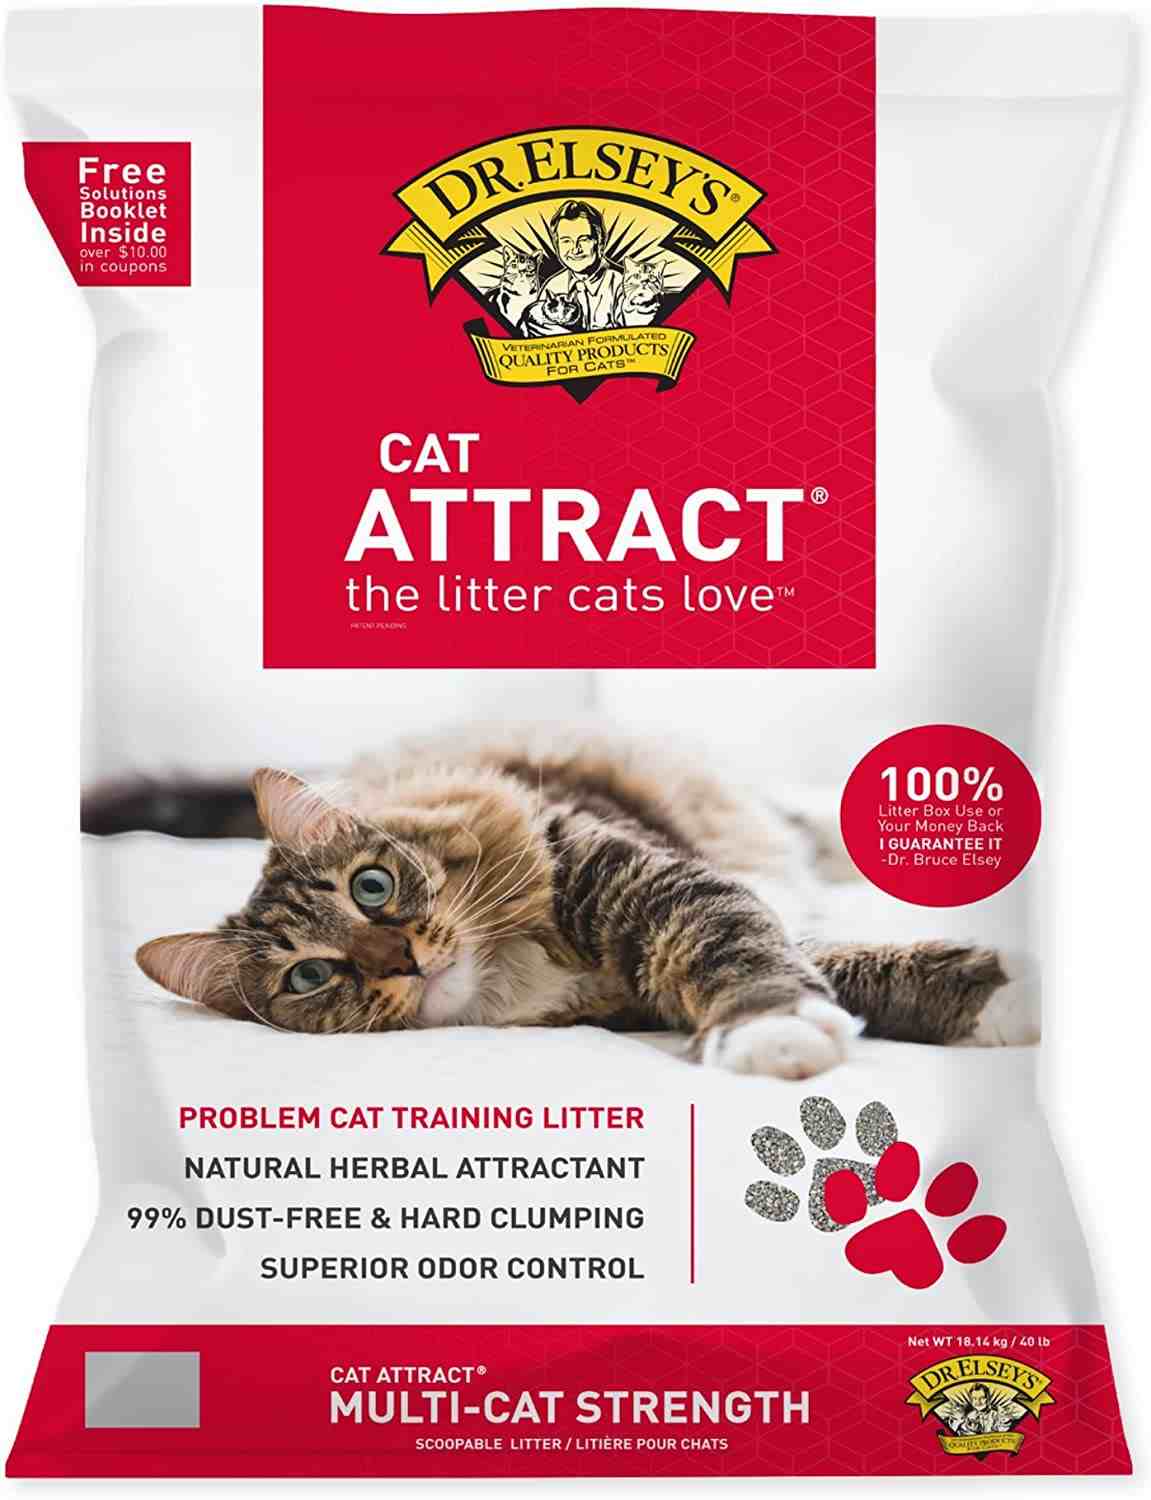 Dr. Elsey's Premium Clumping Cat Litter - Cat Attract - 99% Dust-Free, Low Tracking, Hard Clumping, Superior Odor Control, Natural Herbal Attractant, Unscented & Natural Ingredients, 40 lb